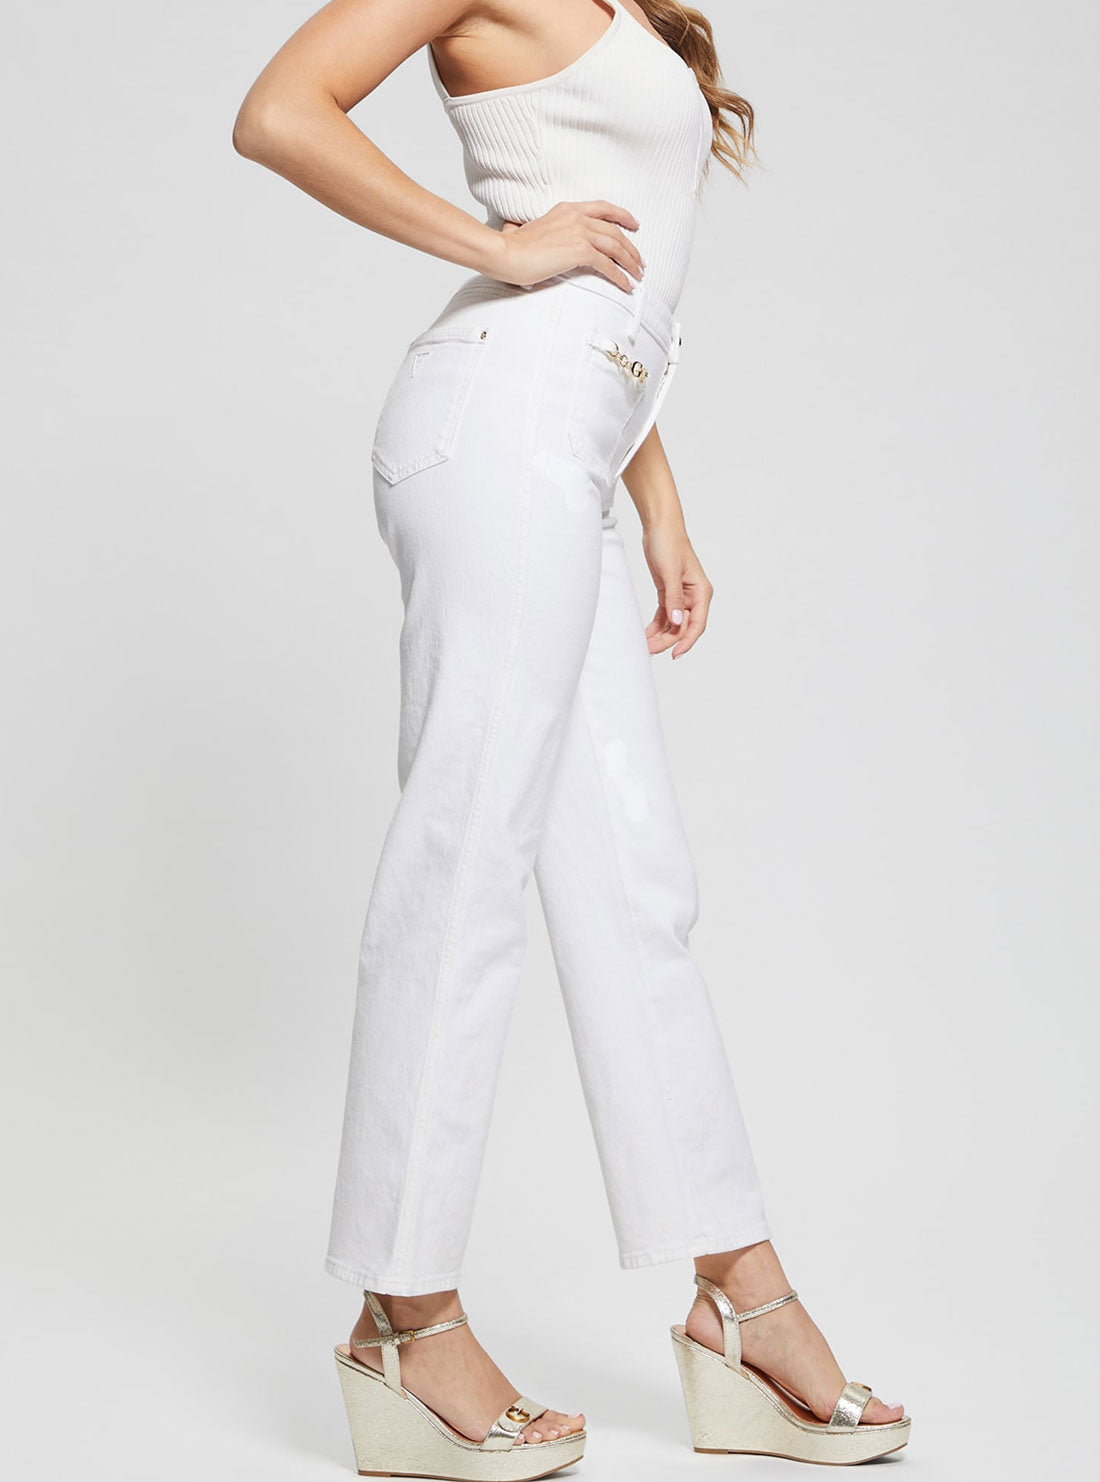 GUESS High-Rise Straight Leg Relaxed Jeans in White Wash side view